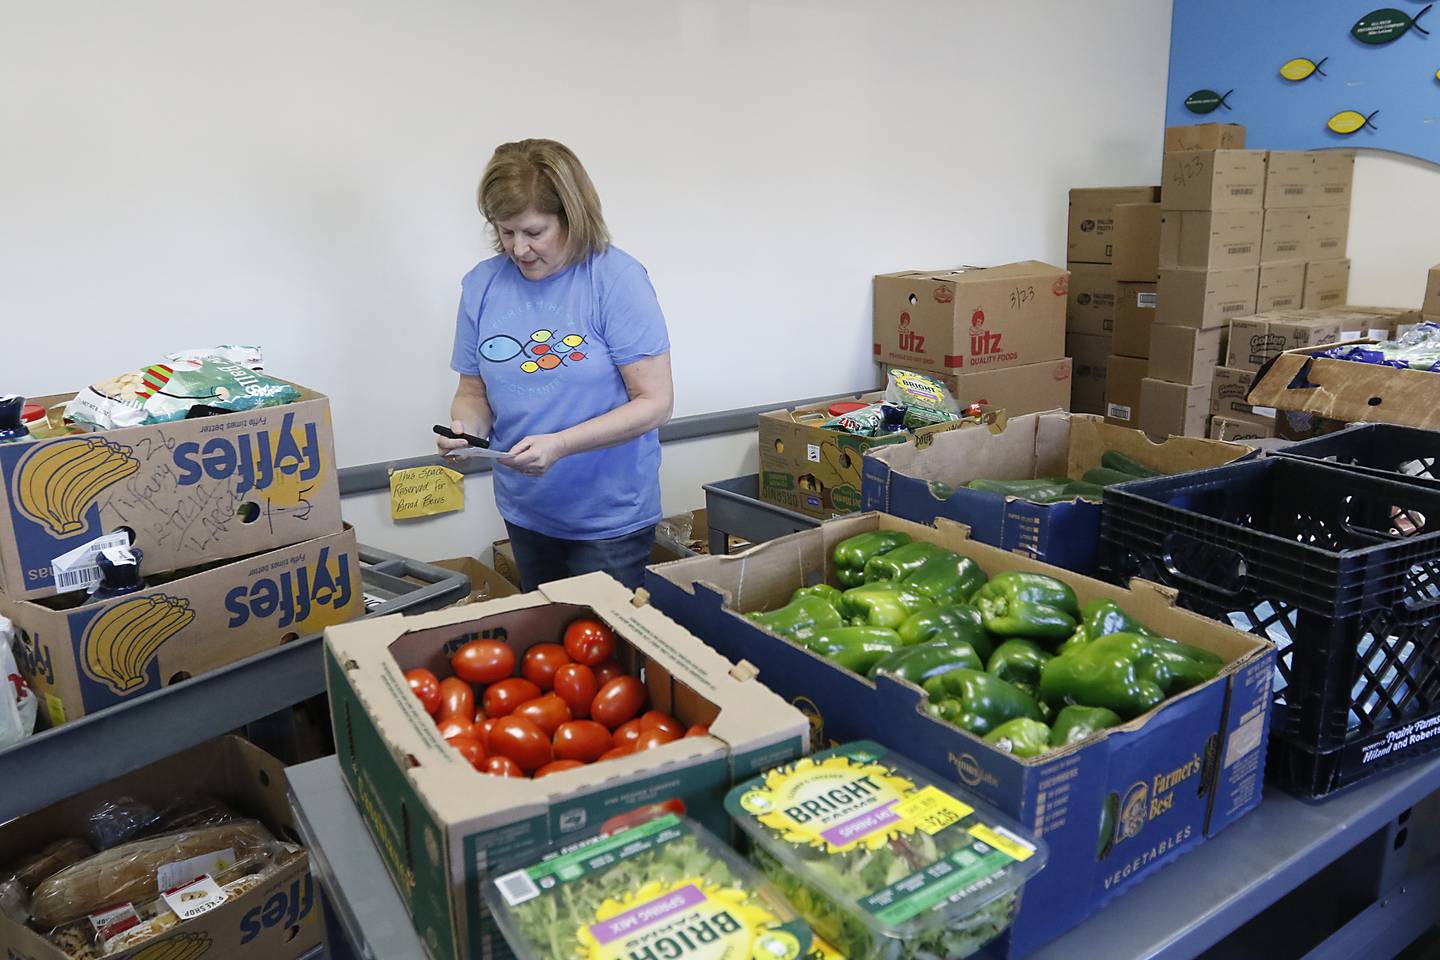 Volunteer Kathy Lambert checks her list as she picks food for a recipient Tuesday, Jan. 10, 2023, inside the FISH of McHenry Food Pantry, 3515 N. Richmond Road in Johnsburg. The pantry, which has changed how it distributes food since the COVID-19 pandemic, is now raising $150,000 to add more storage and a heated garage onto the building.